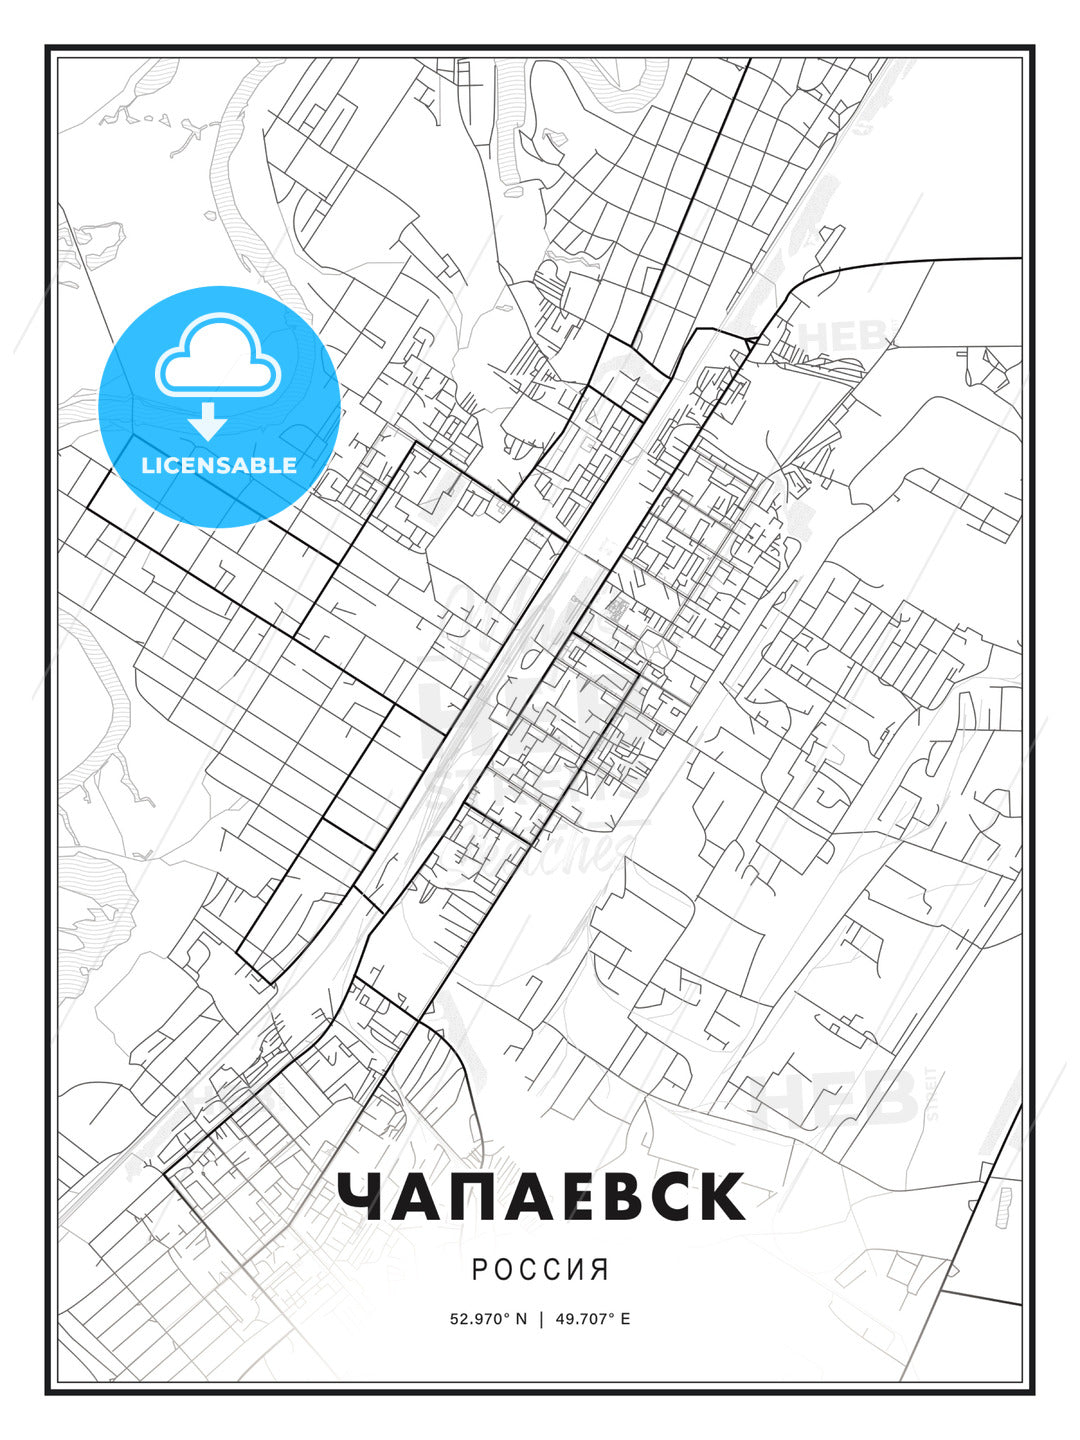 ЧАПАЕВСК / Chapayevsk, Russia, Modern Print Template in Various Formats - HEBSTREITS Sketches